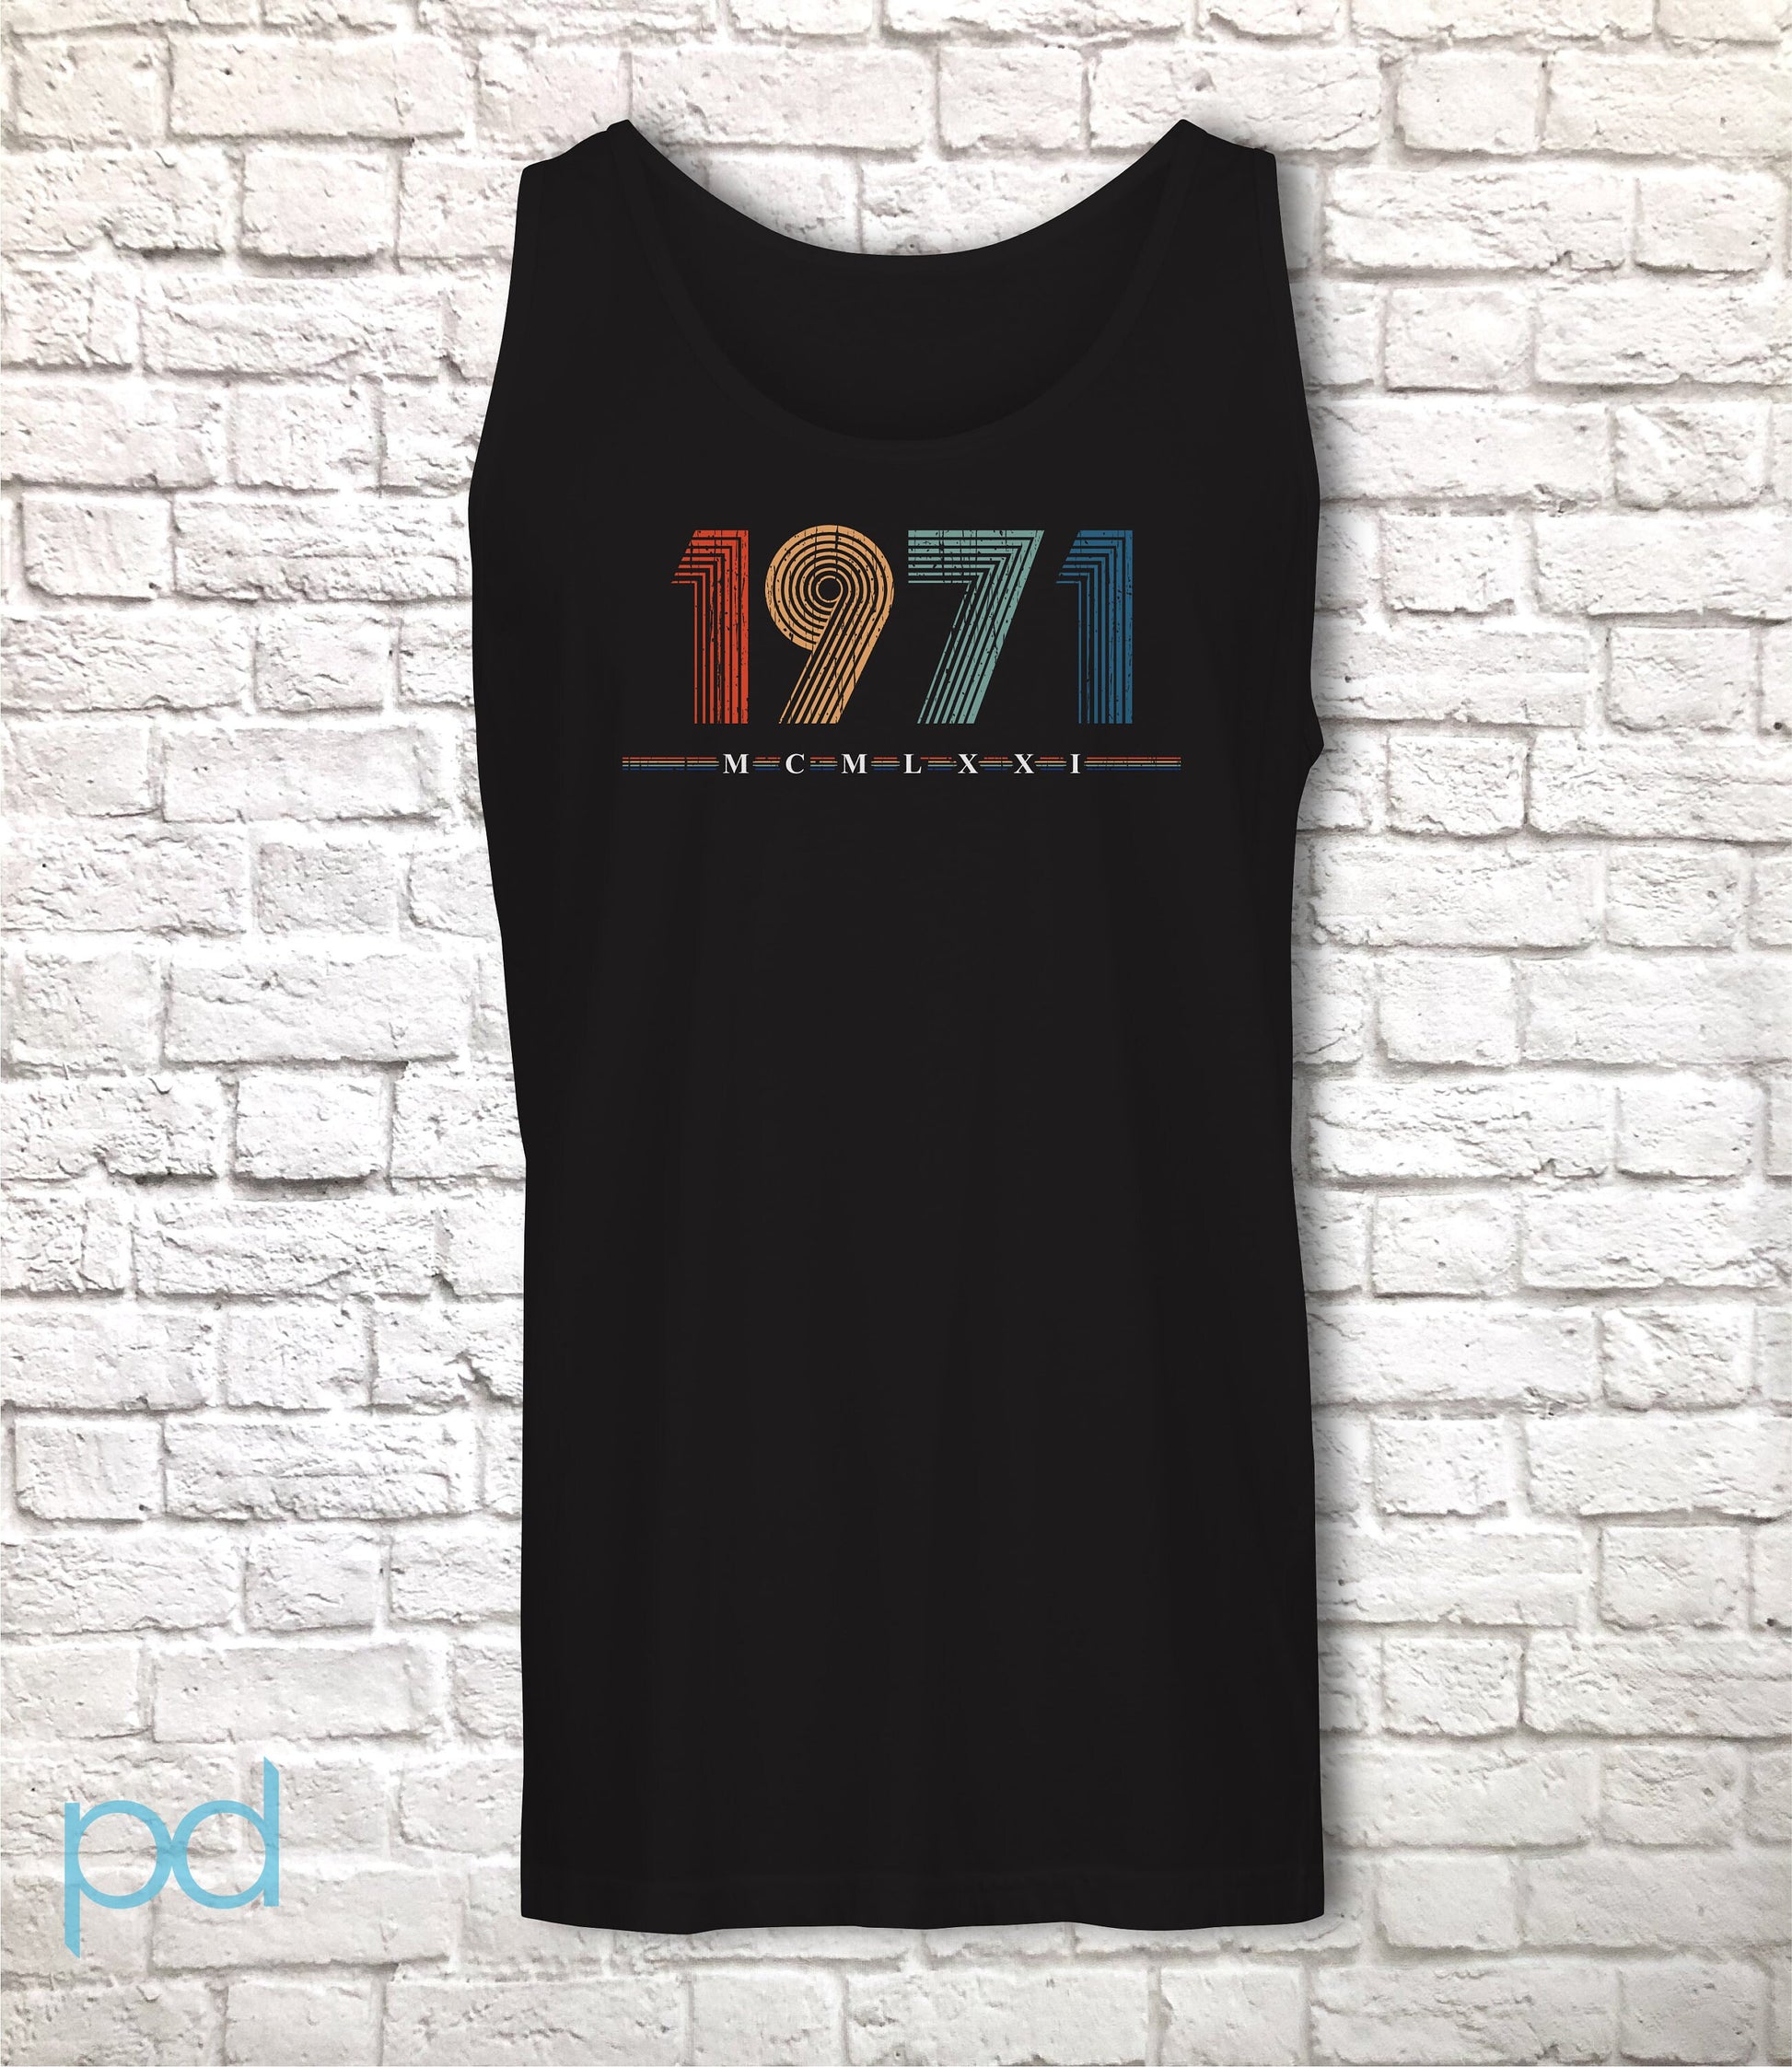 1971 Tank Top, 51st Birthday Gift Vest in Retro & Vintage 70s style, MCMLXXI Fiftieth Bday Muscle Unisex Shirt Top For Men or Women